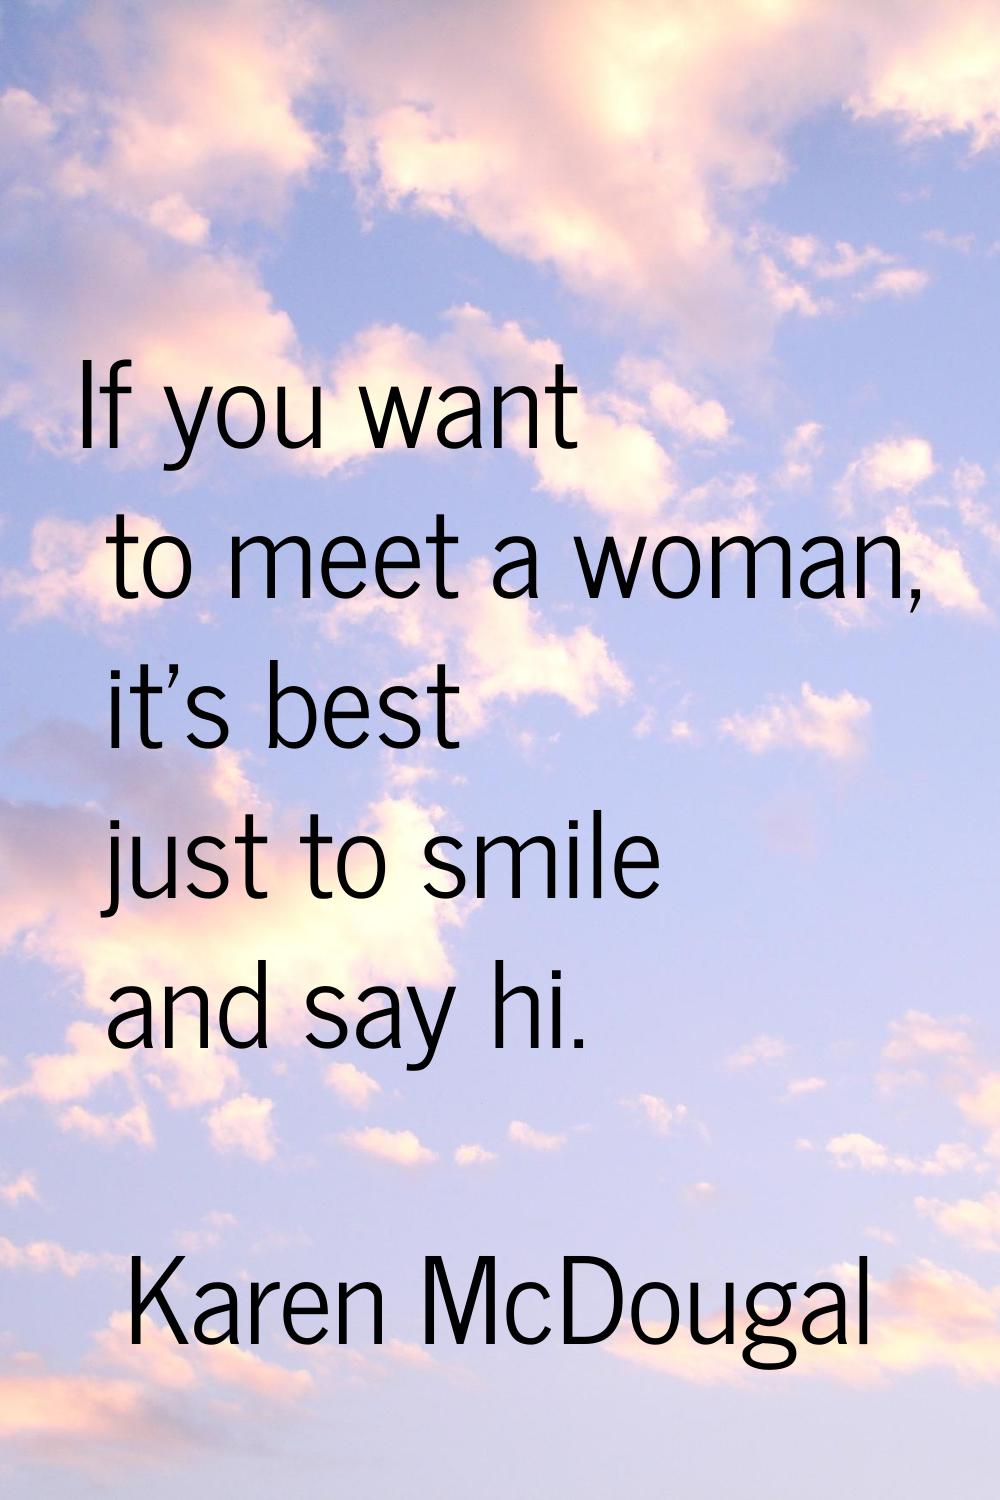 If you want to meet a woman, it's best just to smile and say hi.